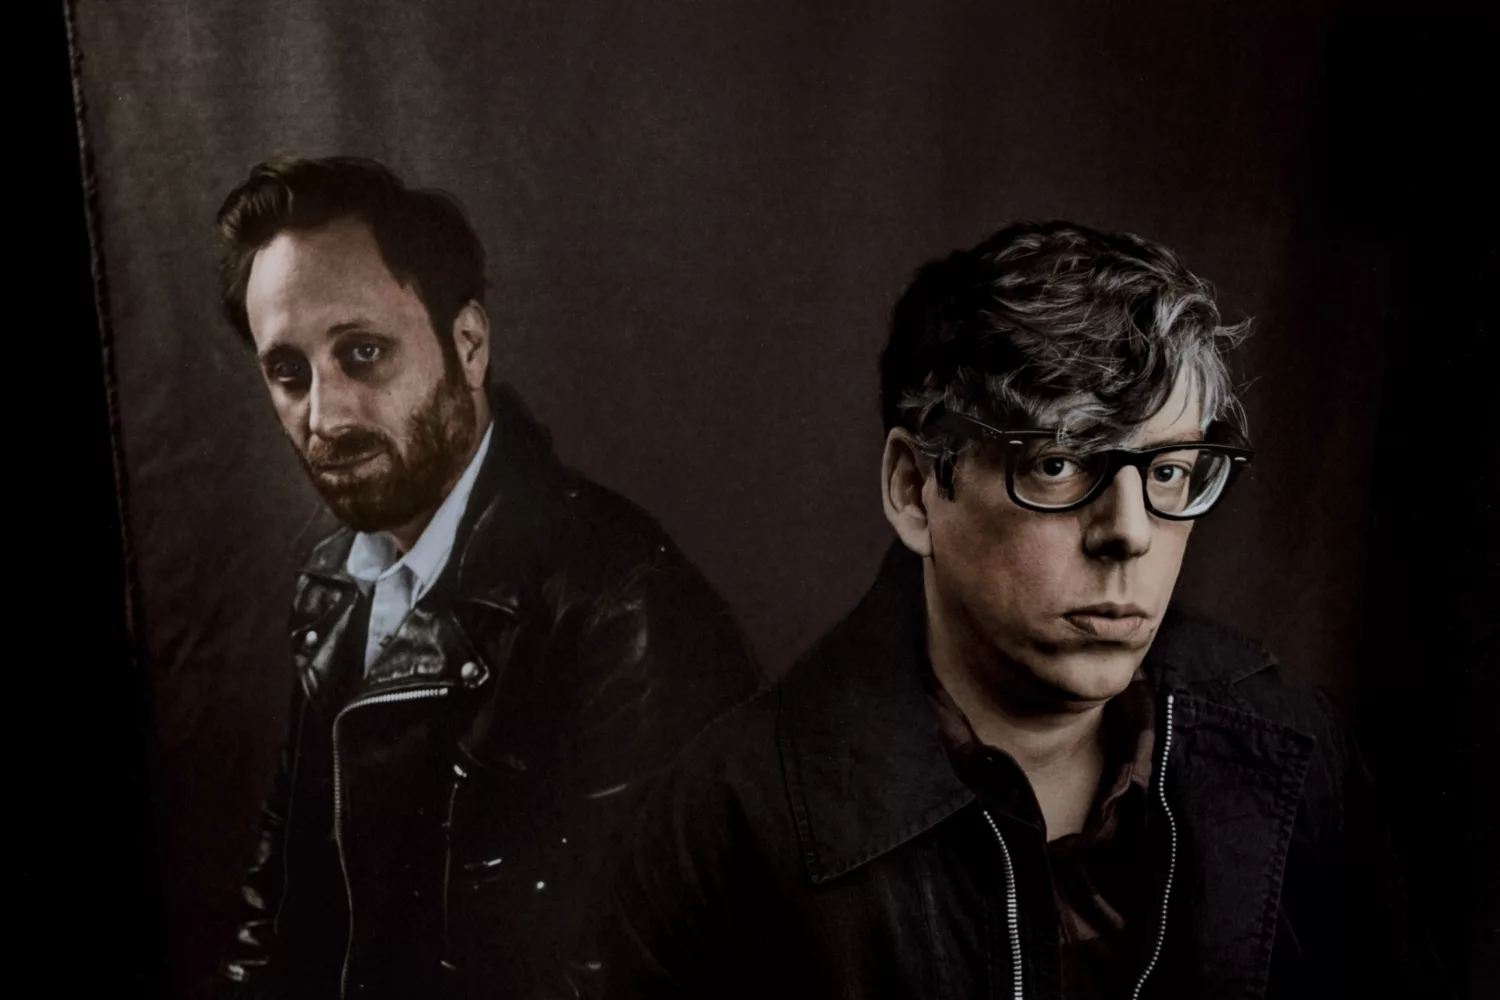 The Black Keys return after 5 years with 'Lo/Hi'